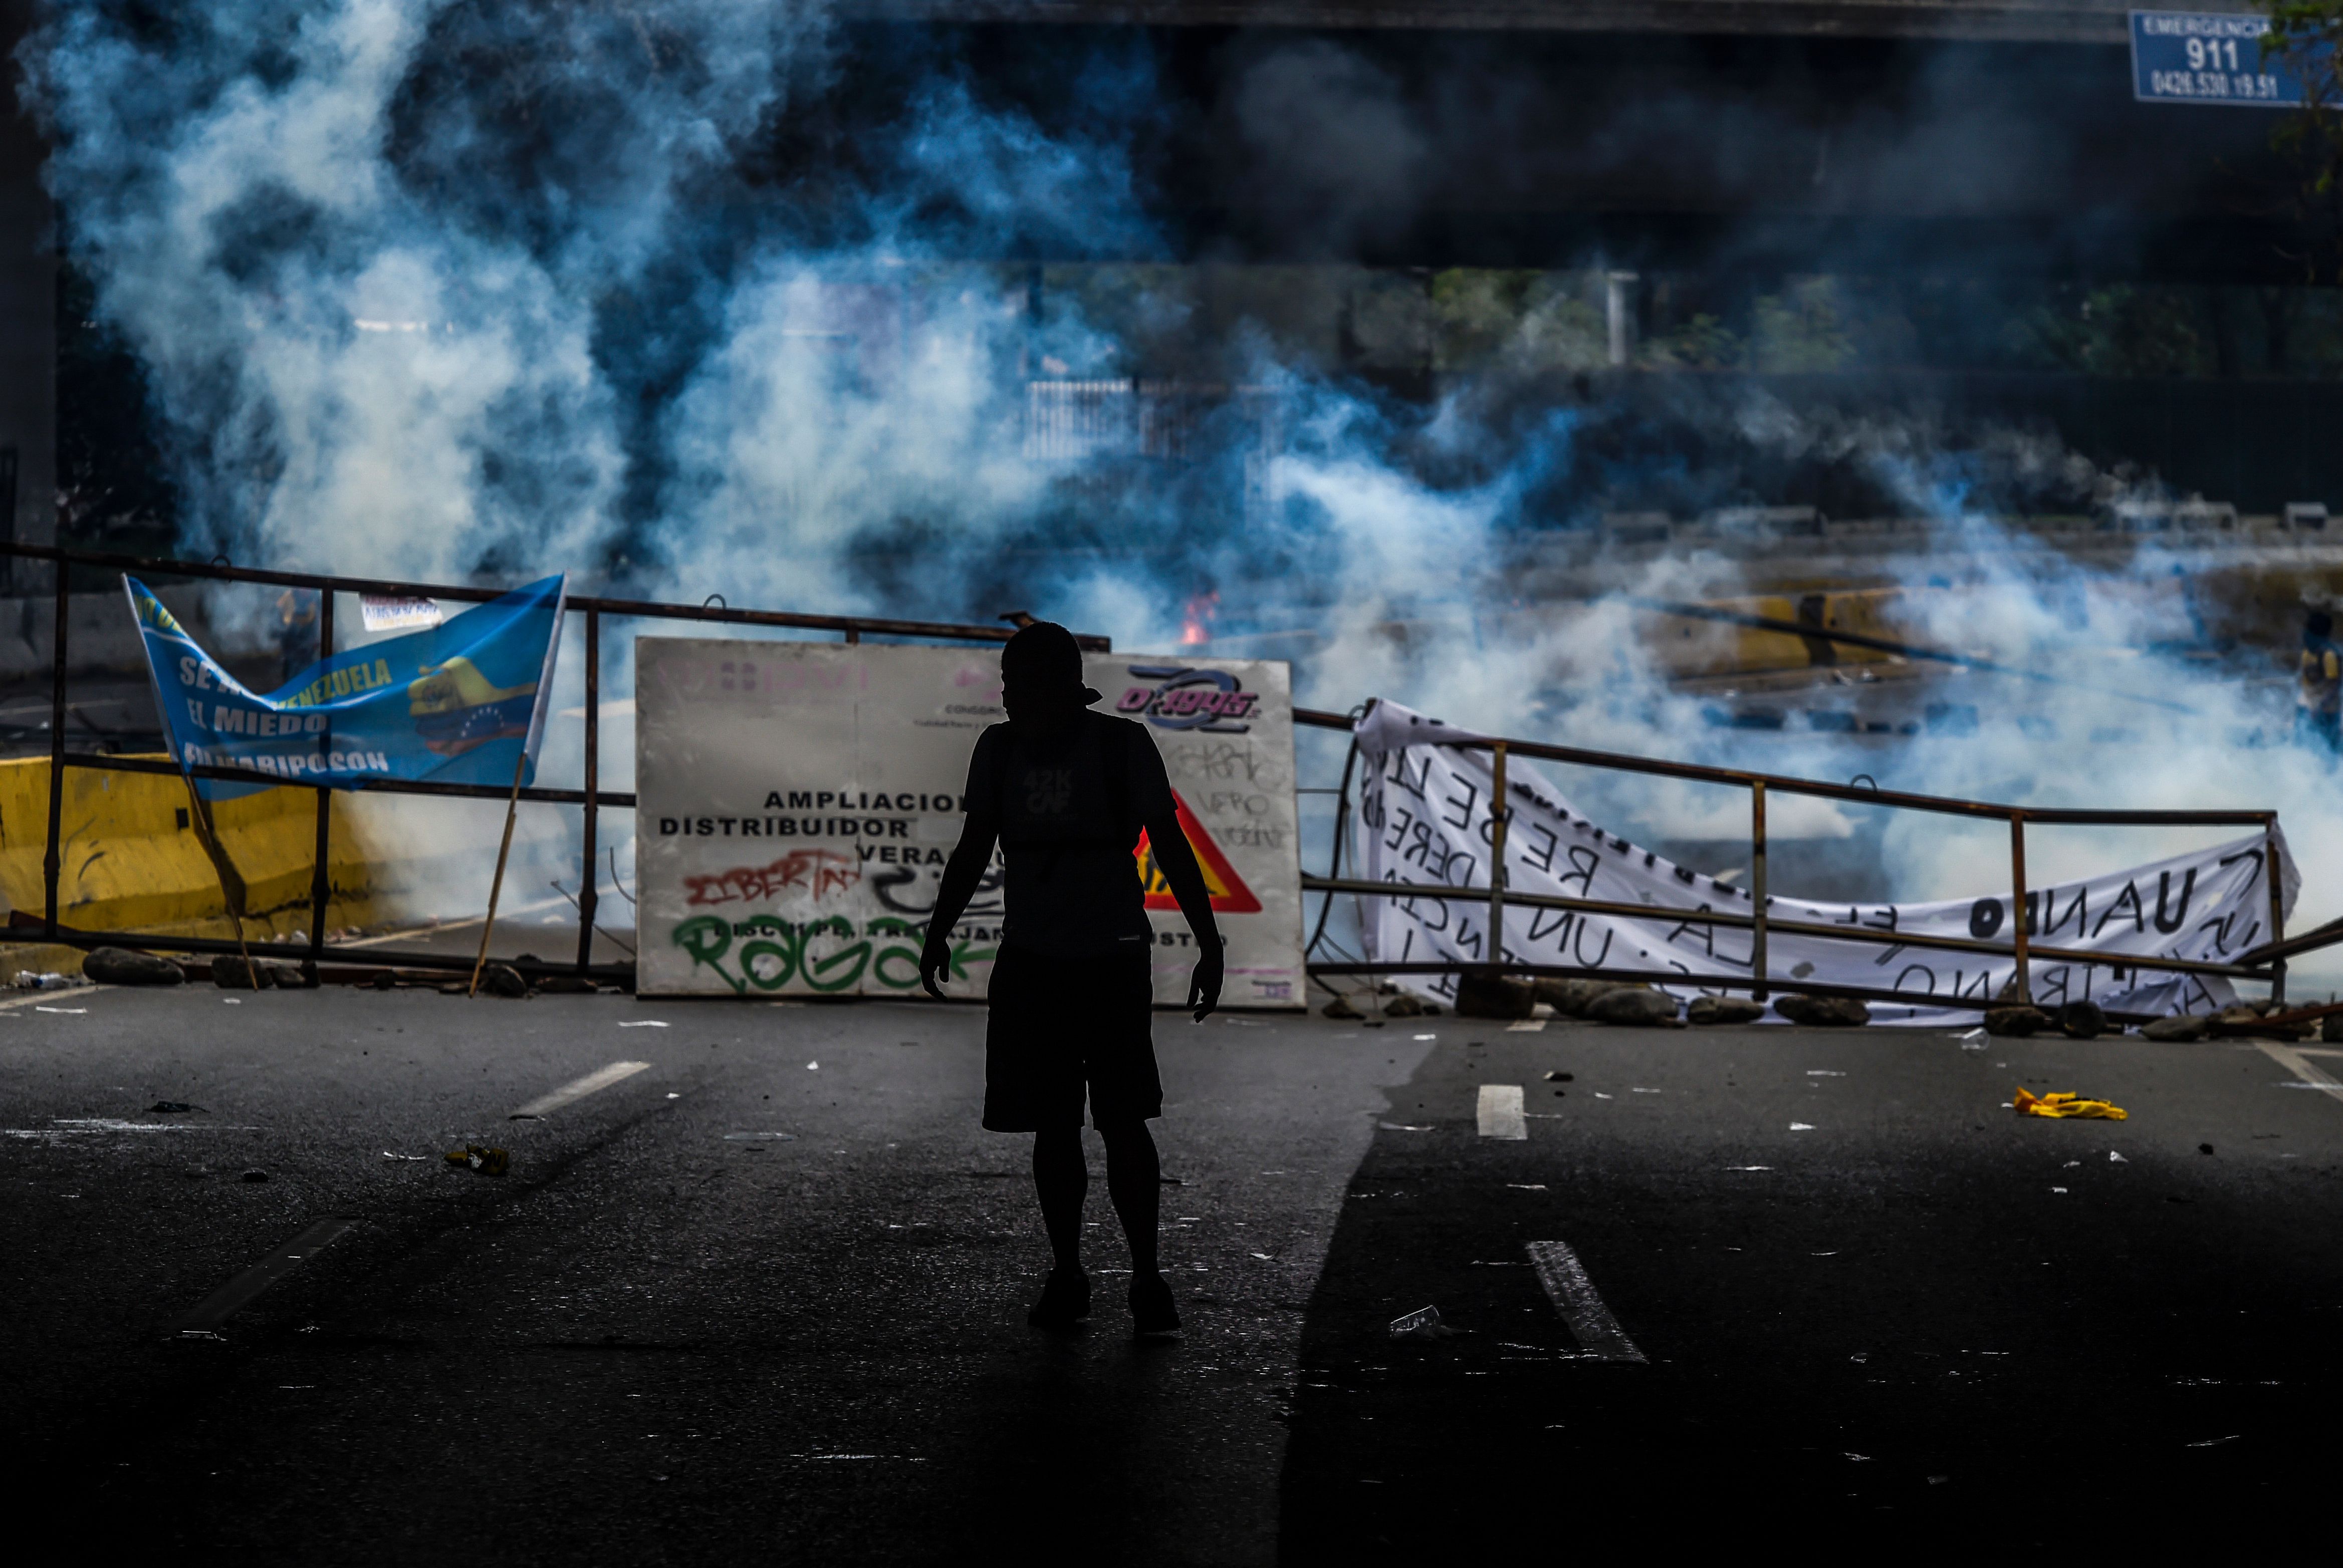 TOPSHOT - A demonstrator seen after clashes with the police during a rally against Venezuelan President Nicolas Maduro, in Caracas on April 19, 2017. Venezuelans took to the streets Wednesday for massive demonstrations for and against President Nicolas Maduro, whose push to tighten his grip on power has triggered deadly unrest that has escalated the country's political and economic crisis. / AFP PHOTO / JUAN BARRETO / TT / kod 444